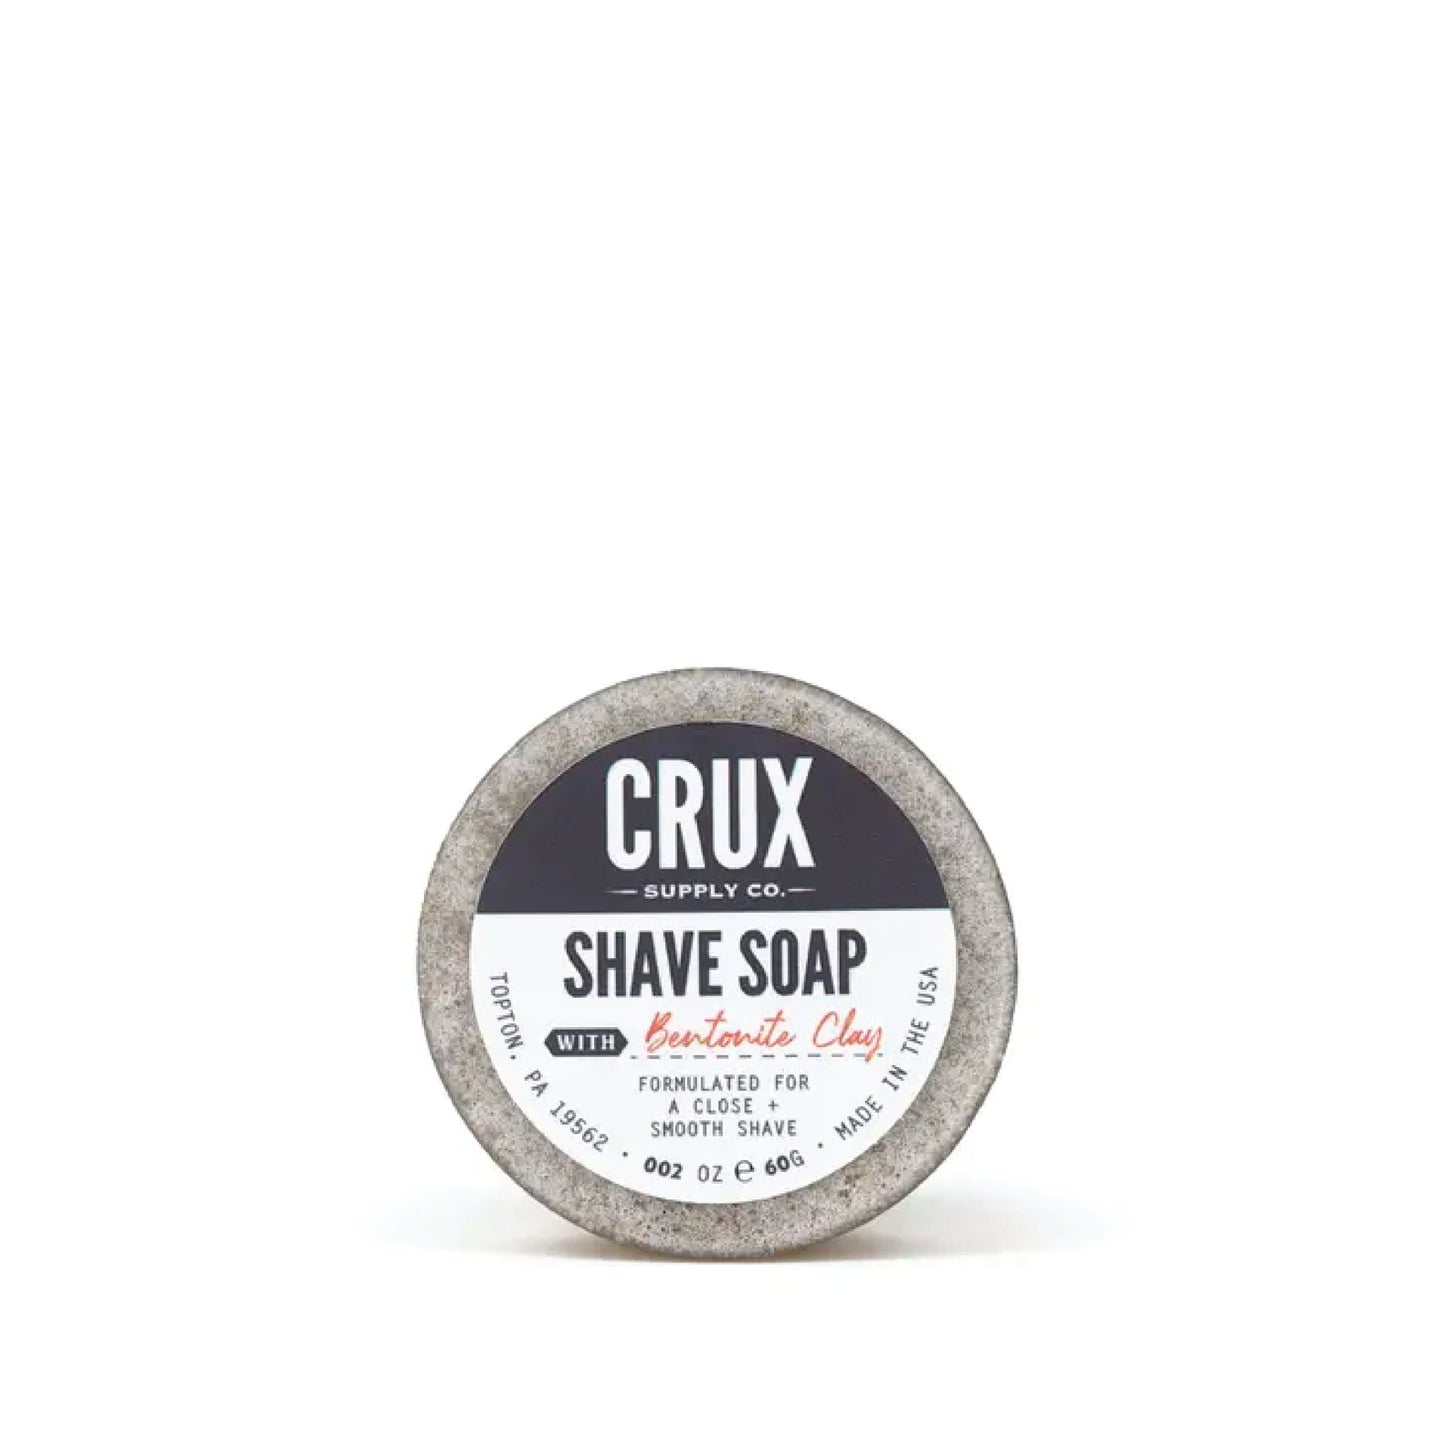 Crux Shave Soap -